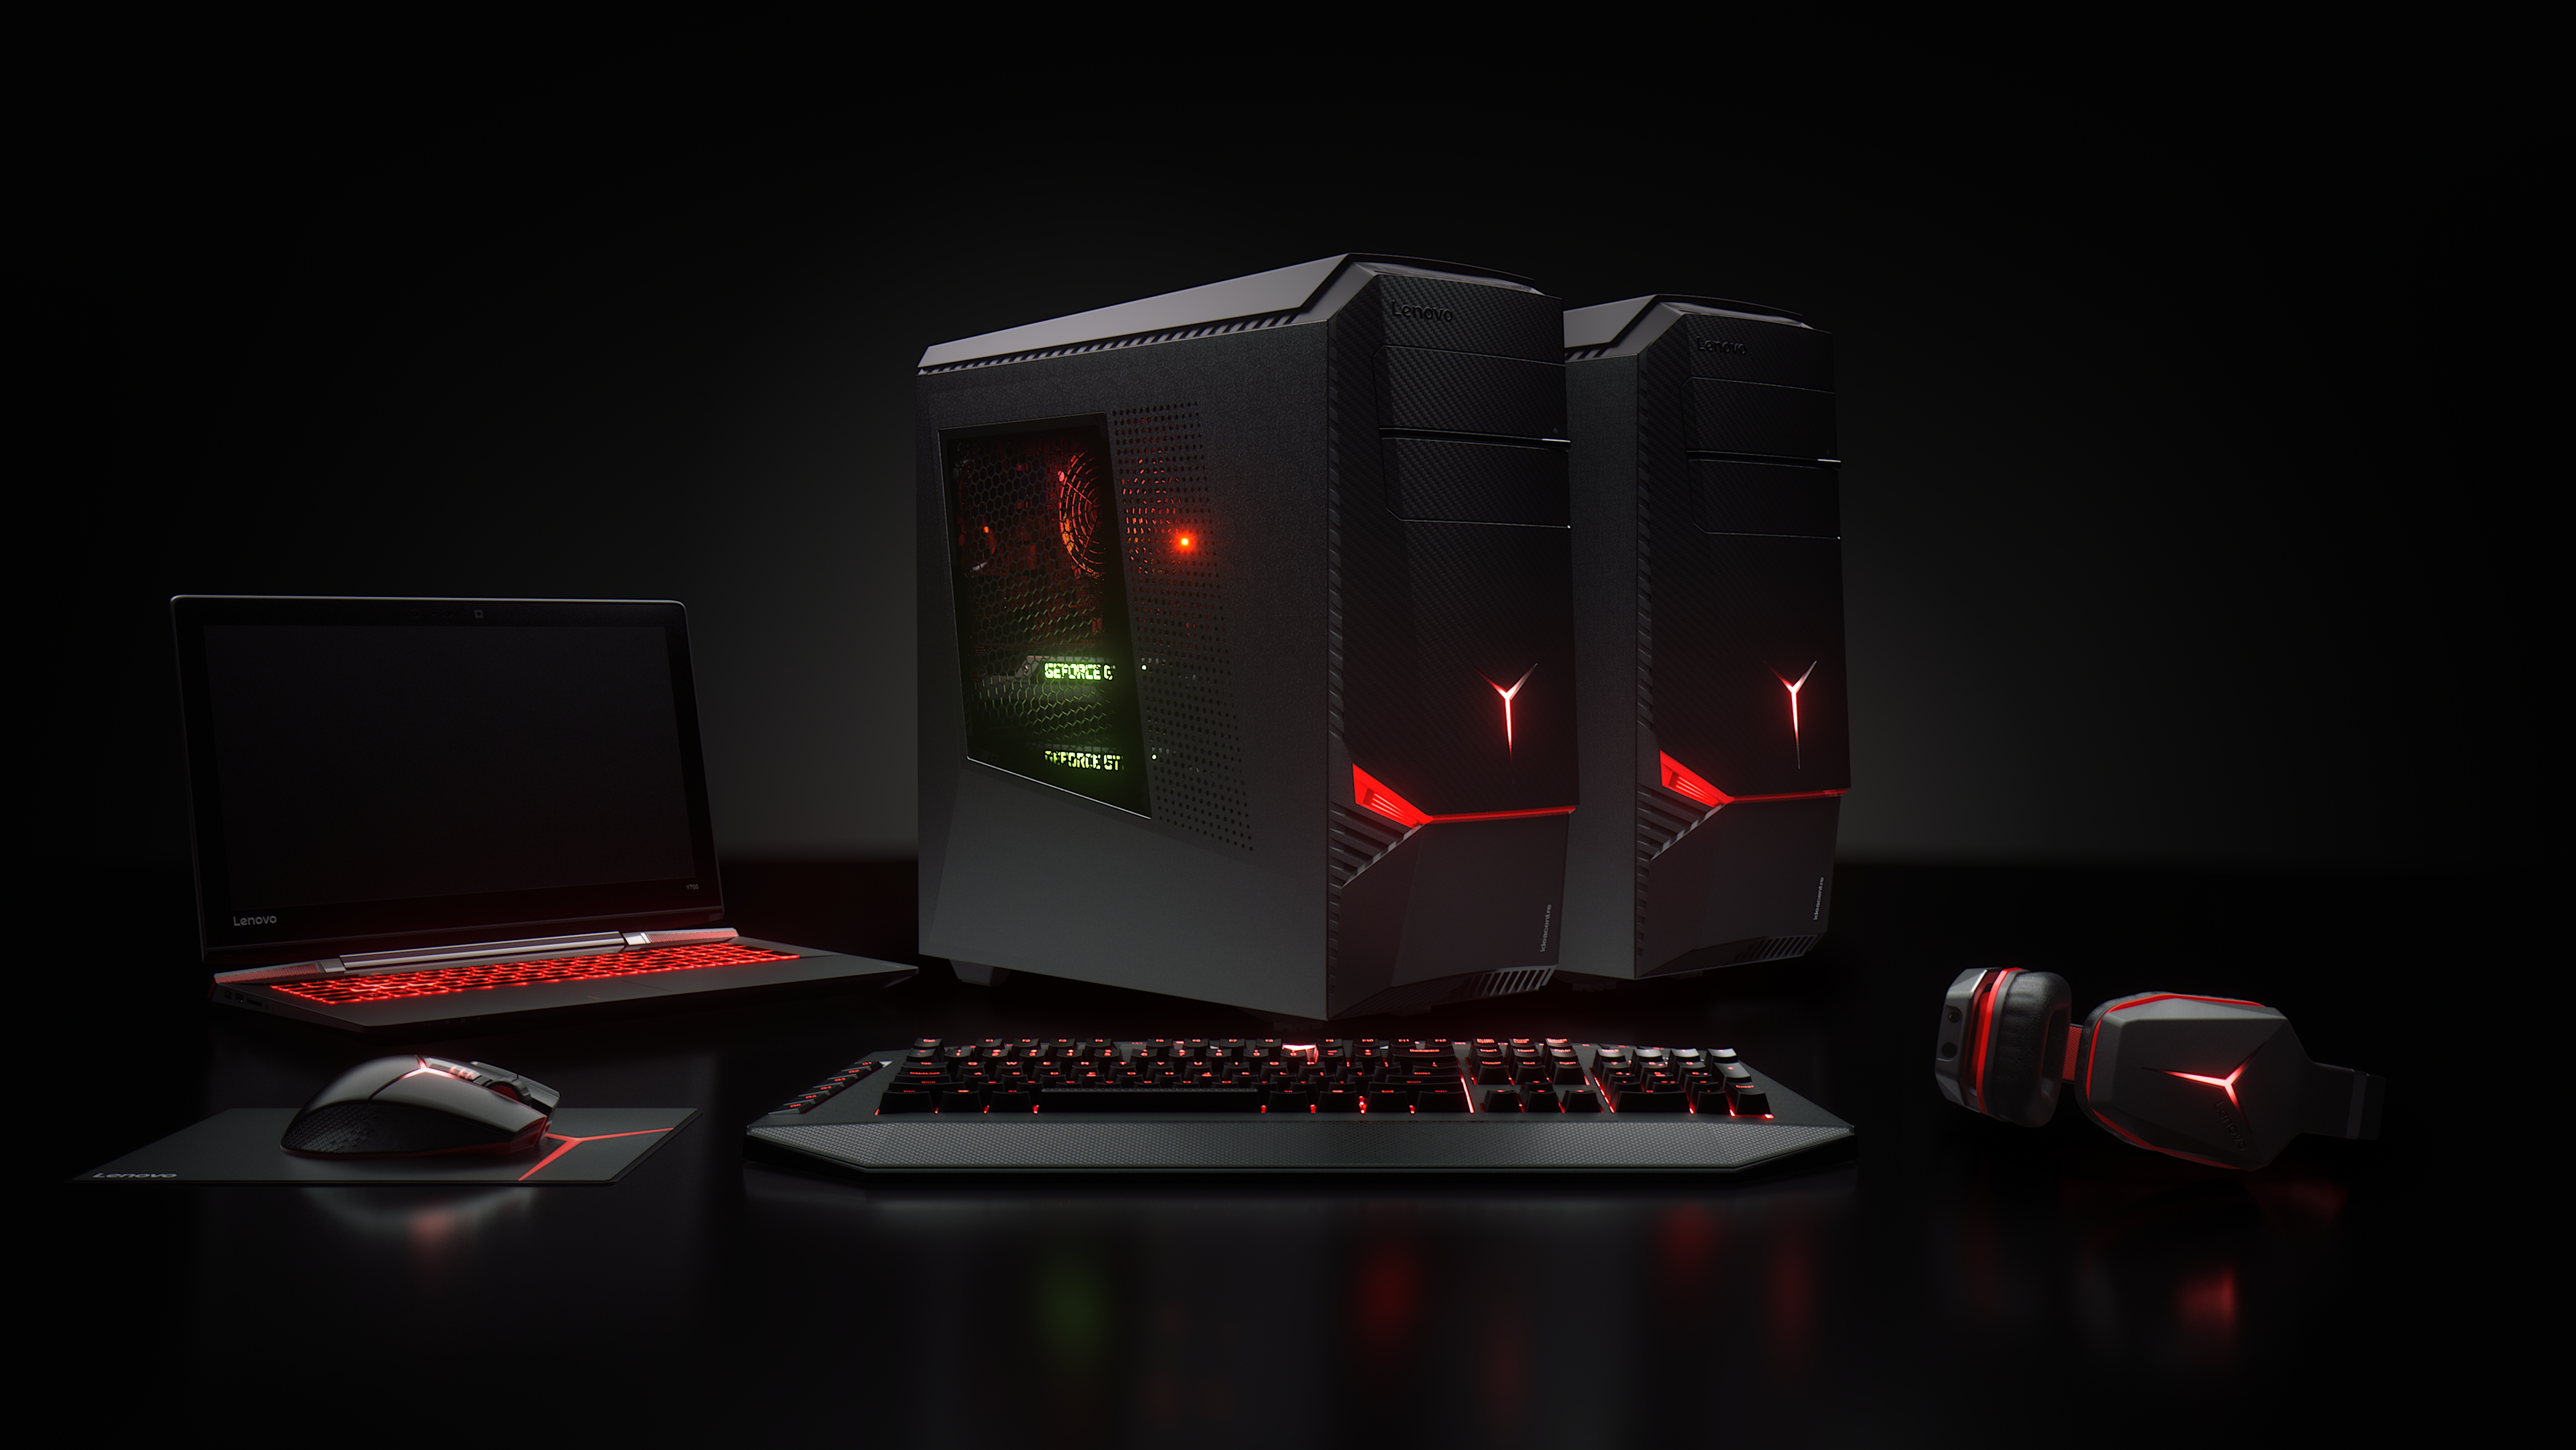 Lenovo PC gaming another shot with new angry-looking laptops | Ars Technica